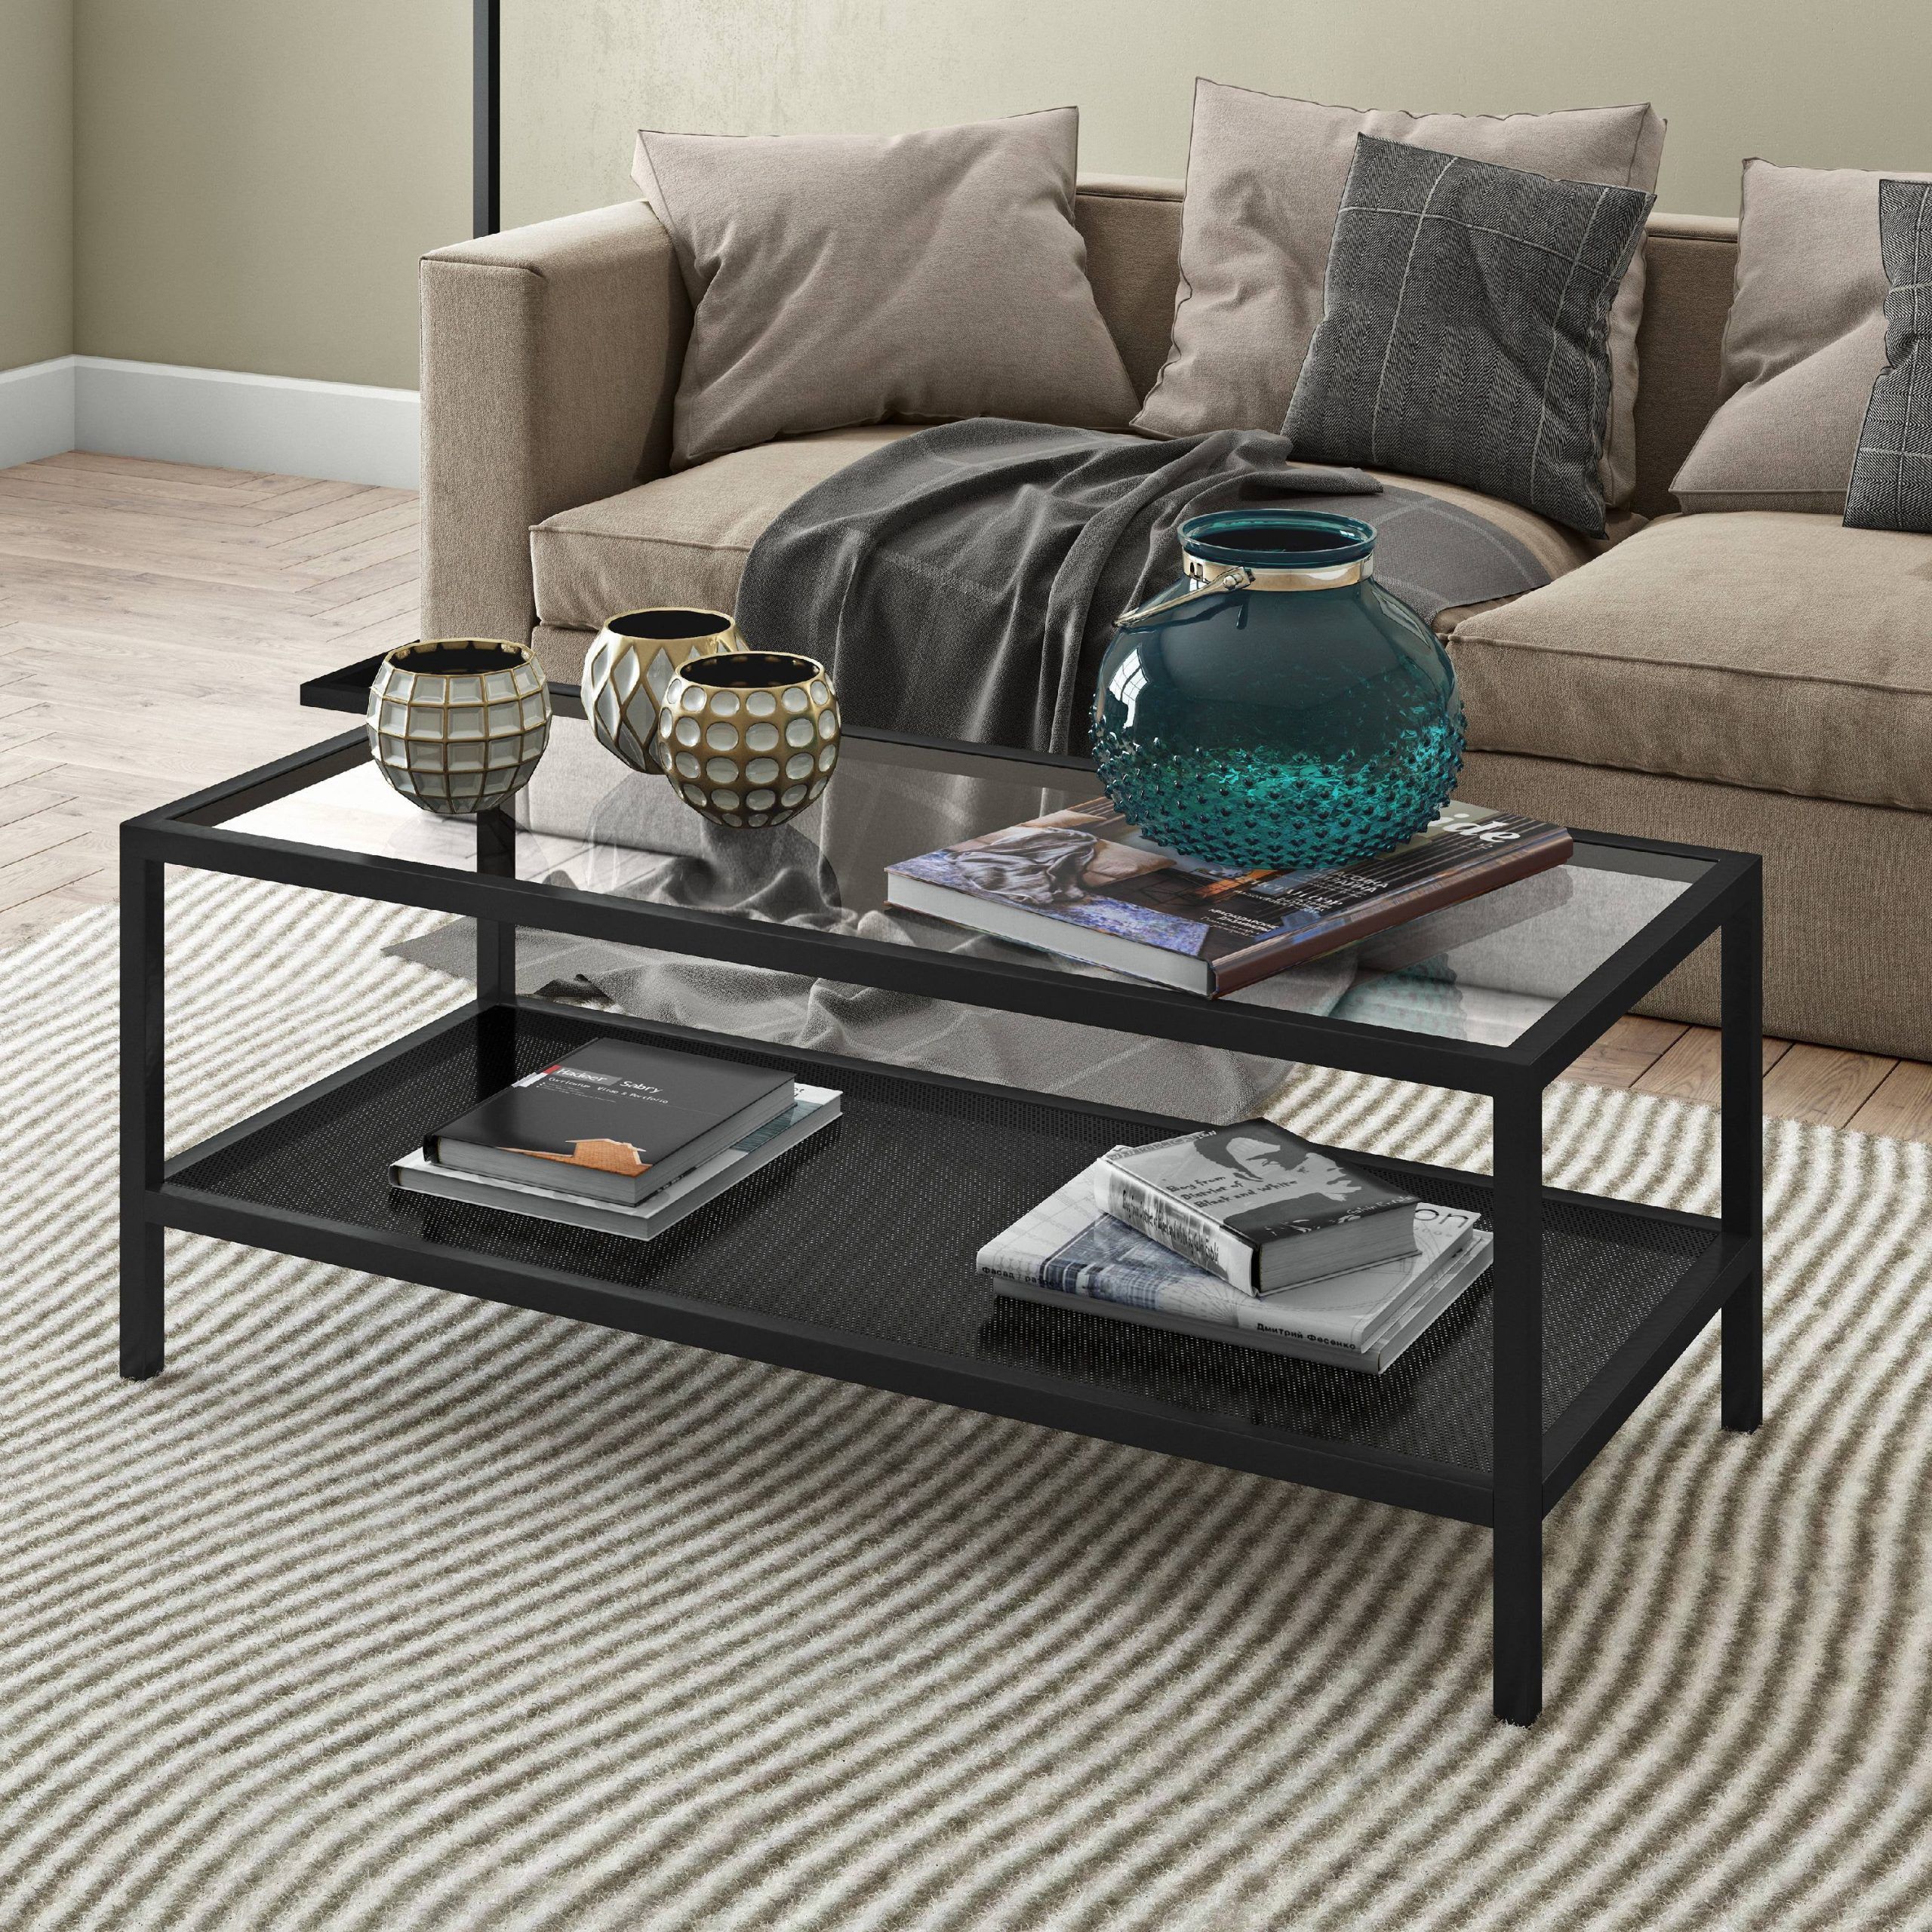 Evelyn&zoe Contemporary Metal Coffee Table With Glass Top – Walmart With Glass Coffee Tables With Lower Shelves (View 19 of 20)